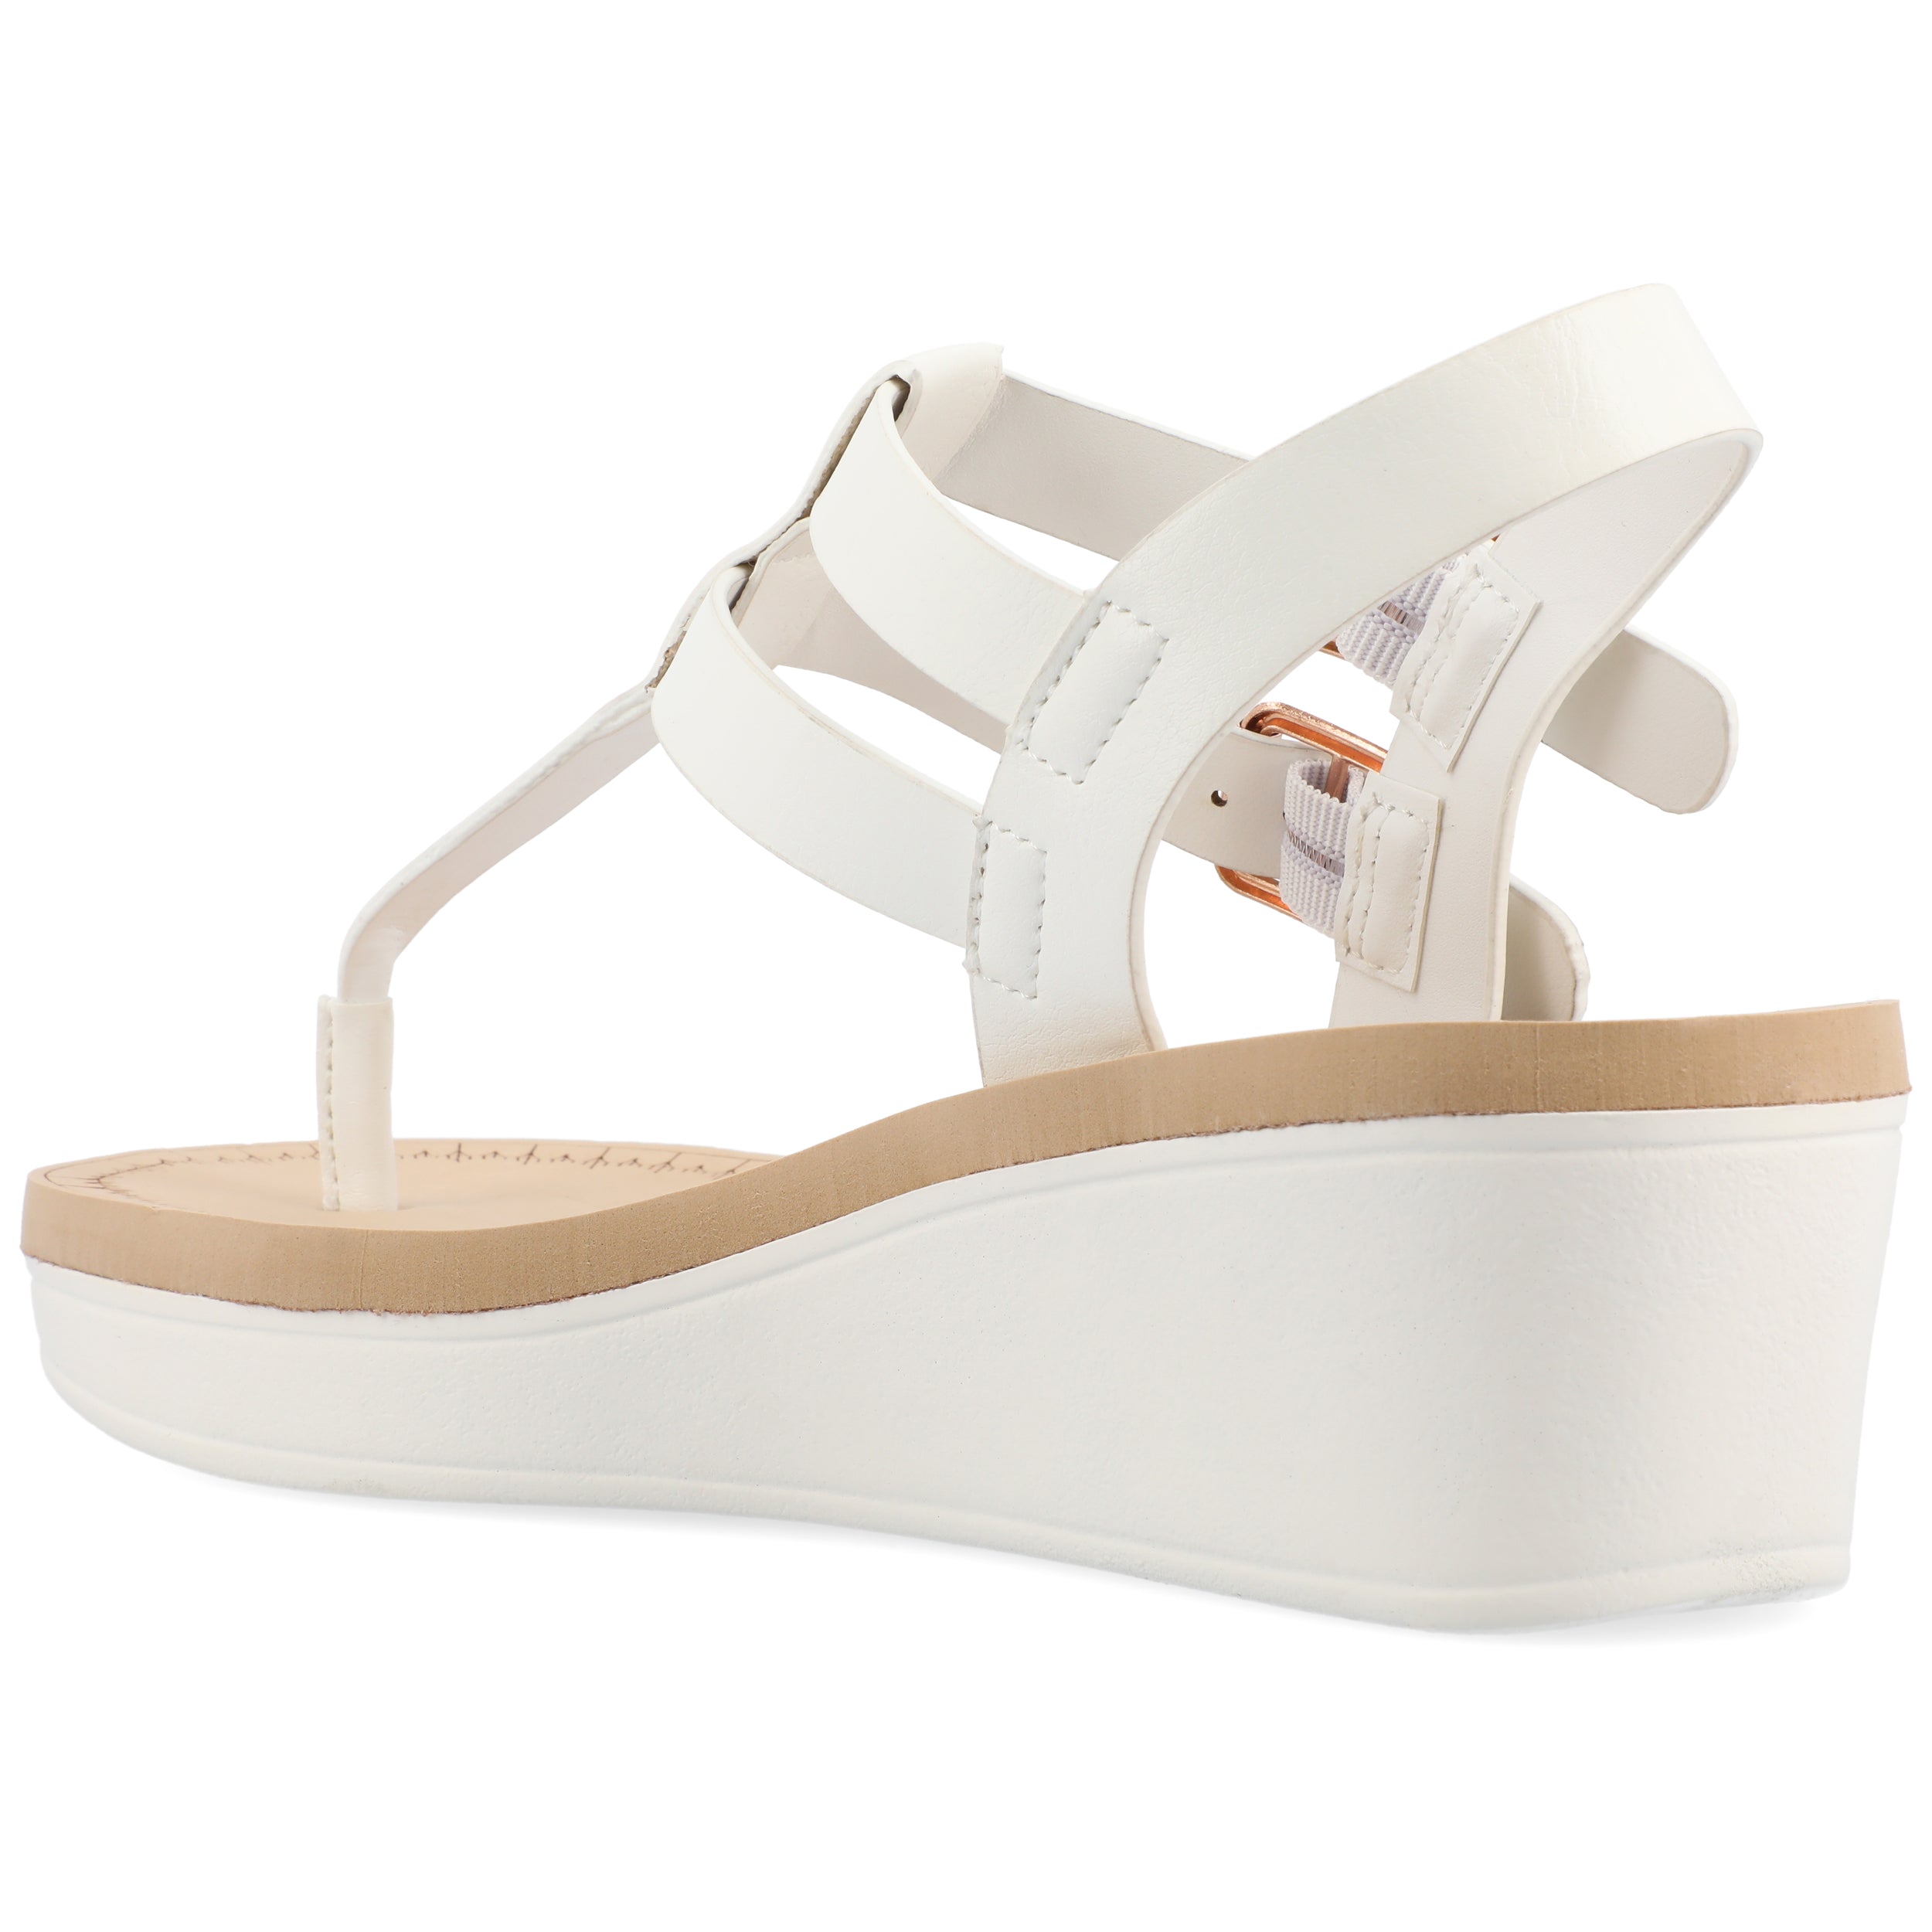 Stylish Platform Wedge Sandals for Summer | Lone Star Looking Glass